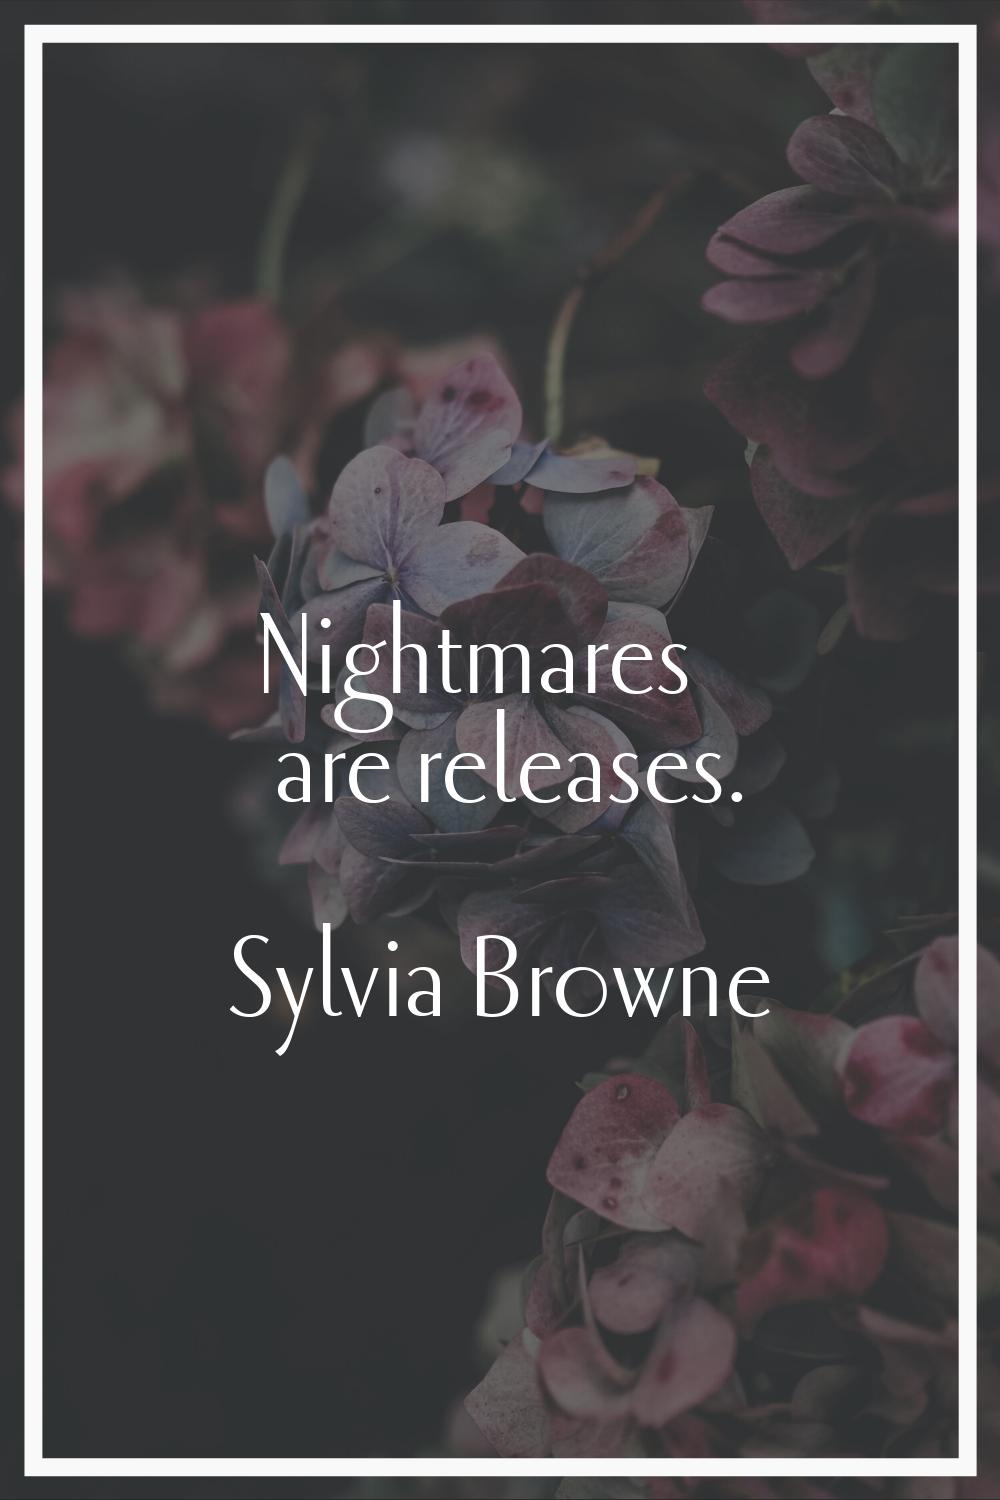 Nightmares are releases.